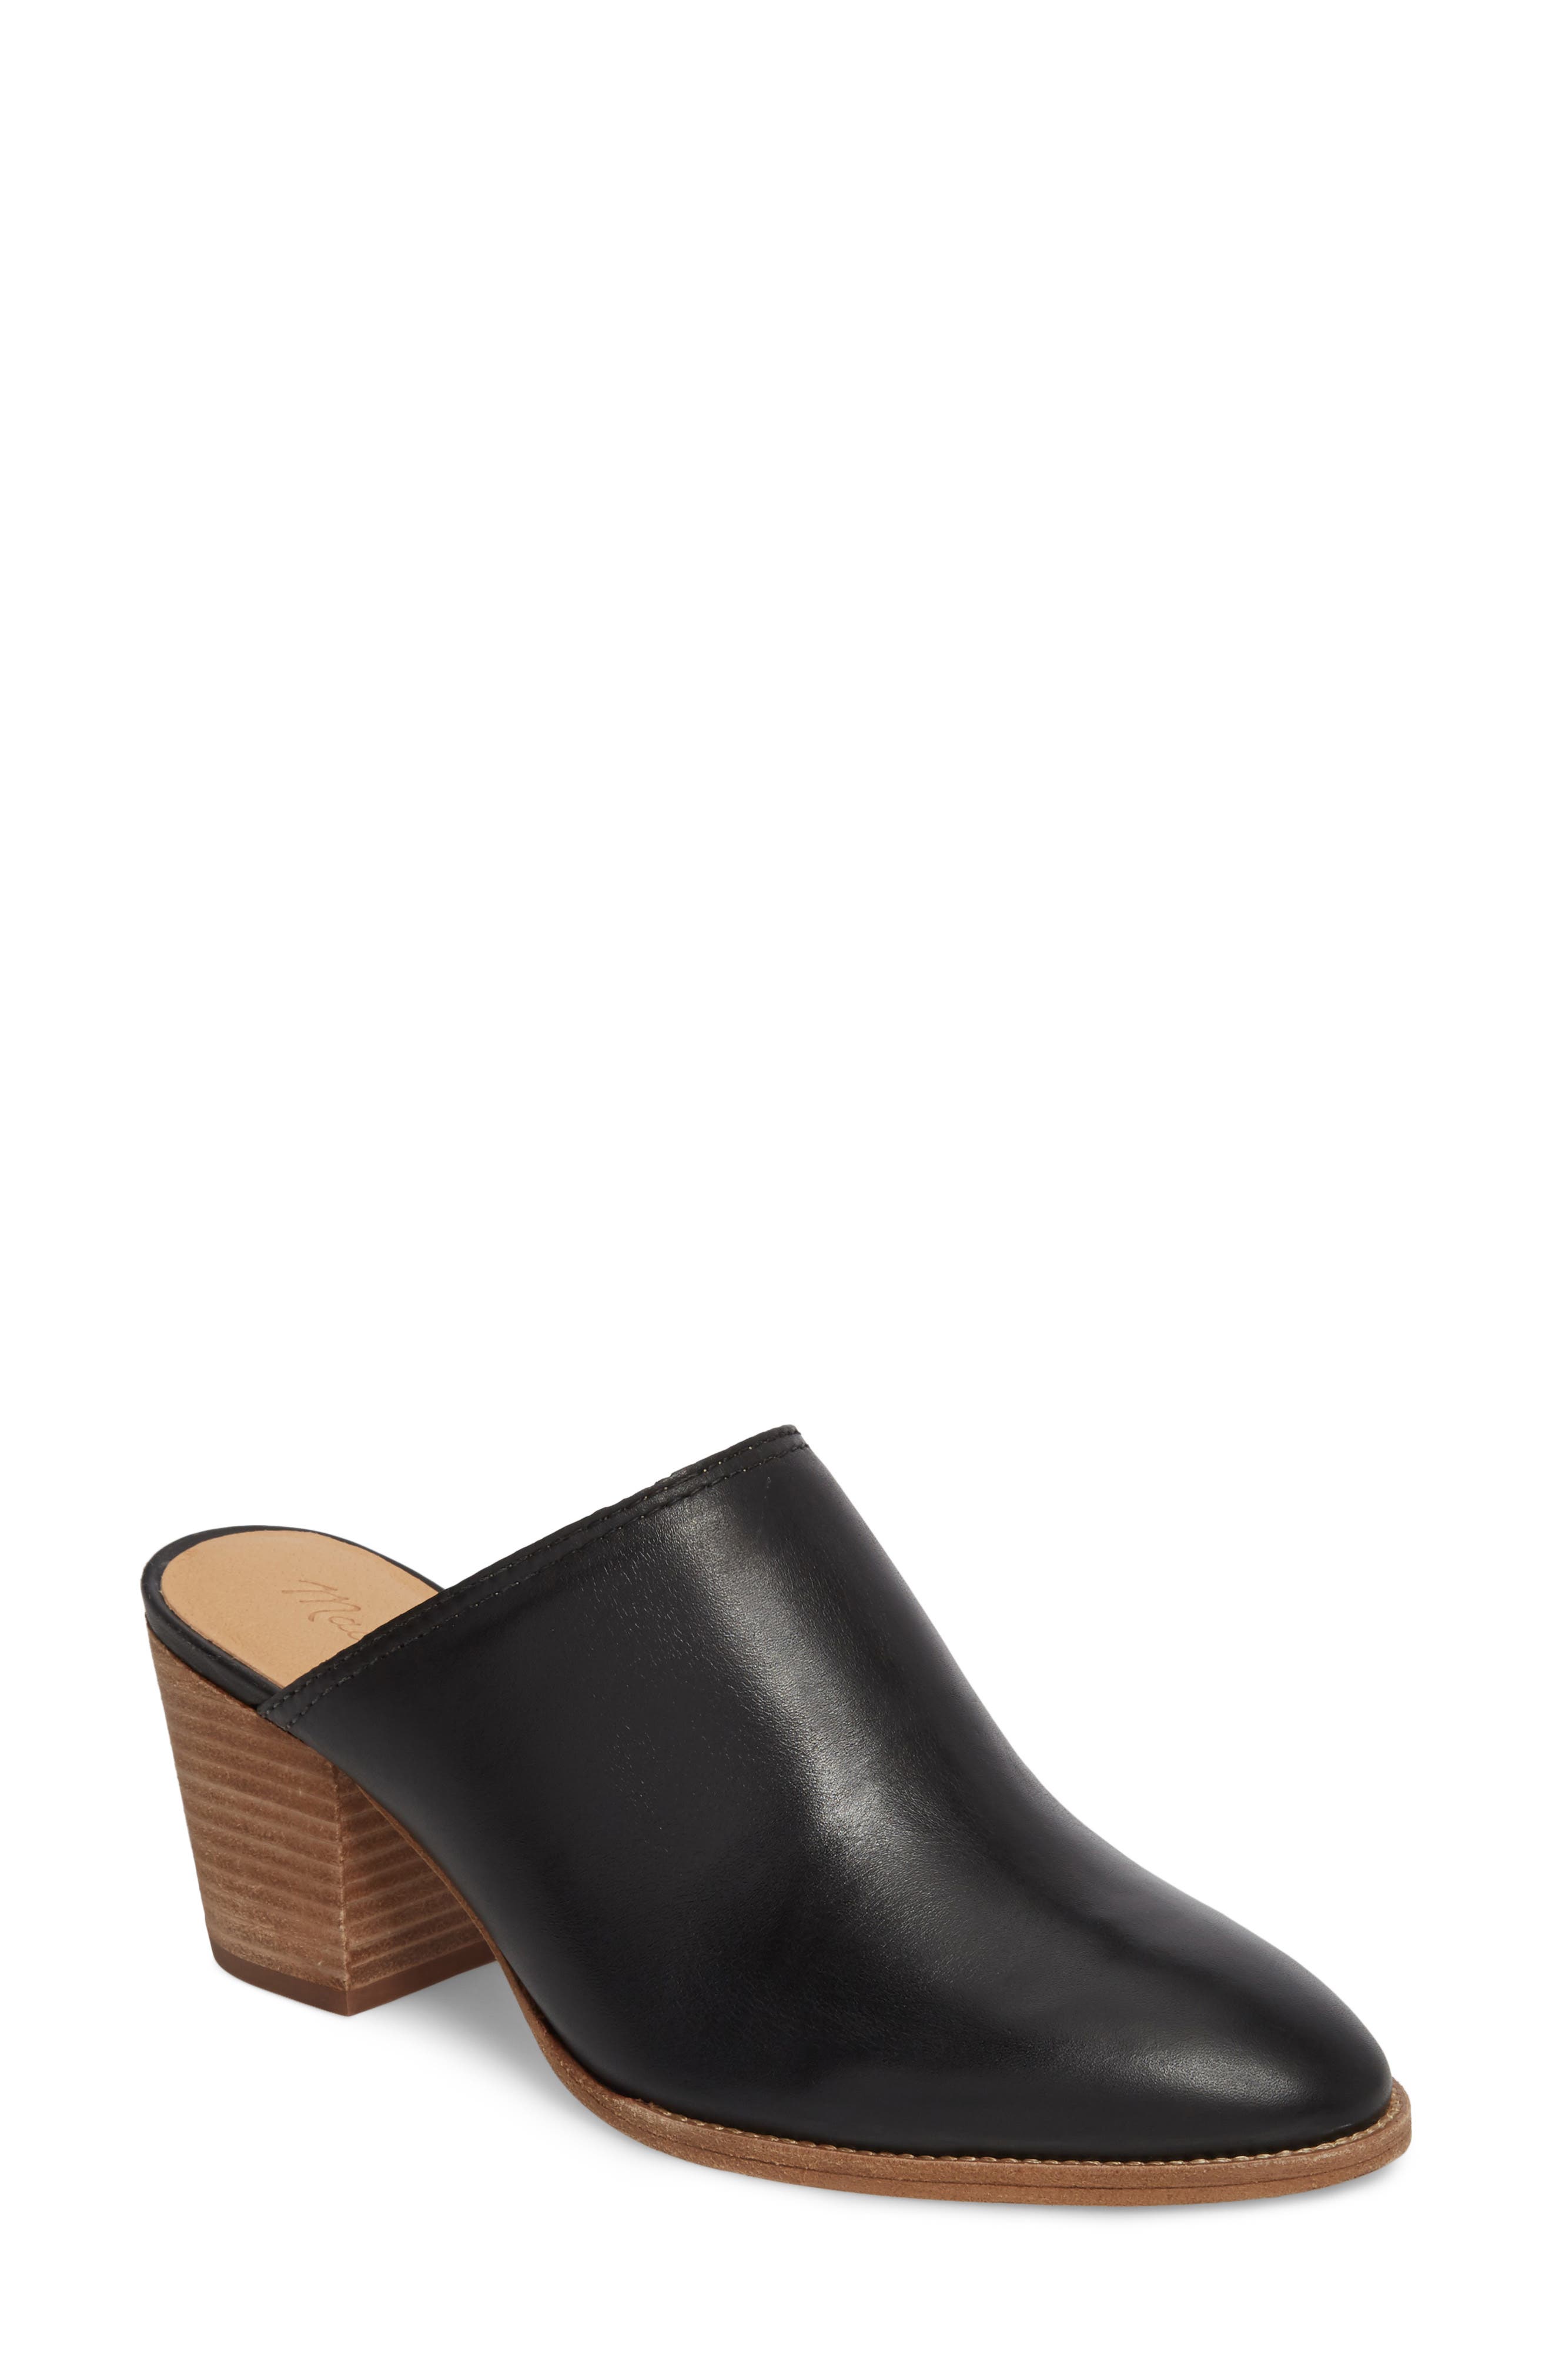 Madewell Leathers THE HARPER MULE